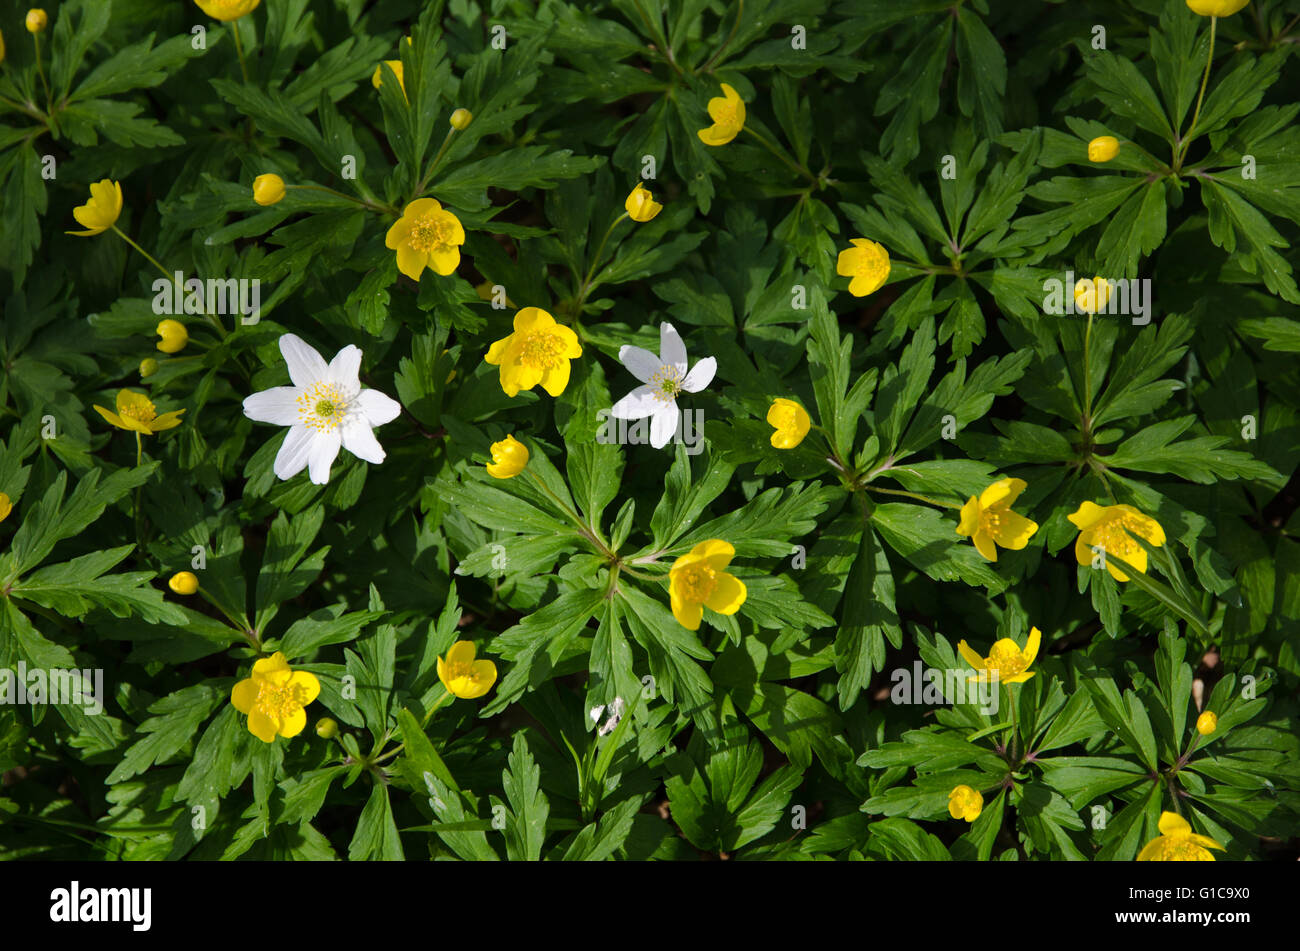 White and yellow spring flowers with fresh green leaves Stock Photo